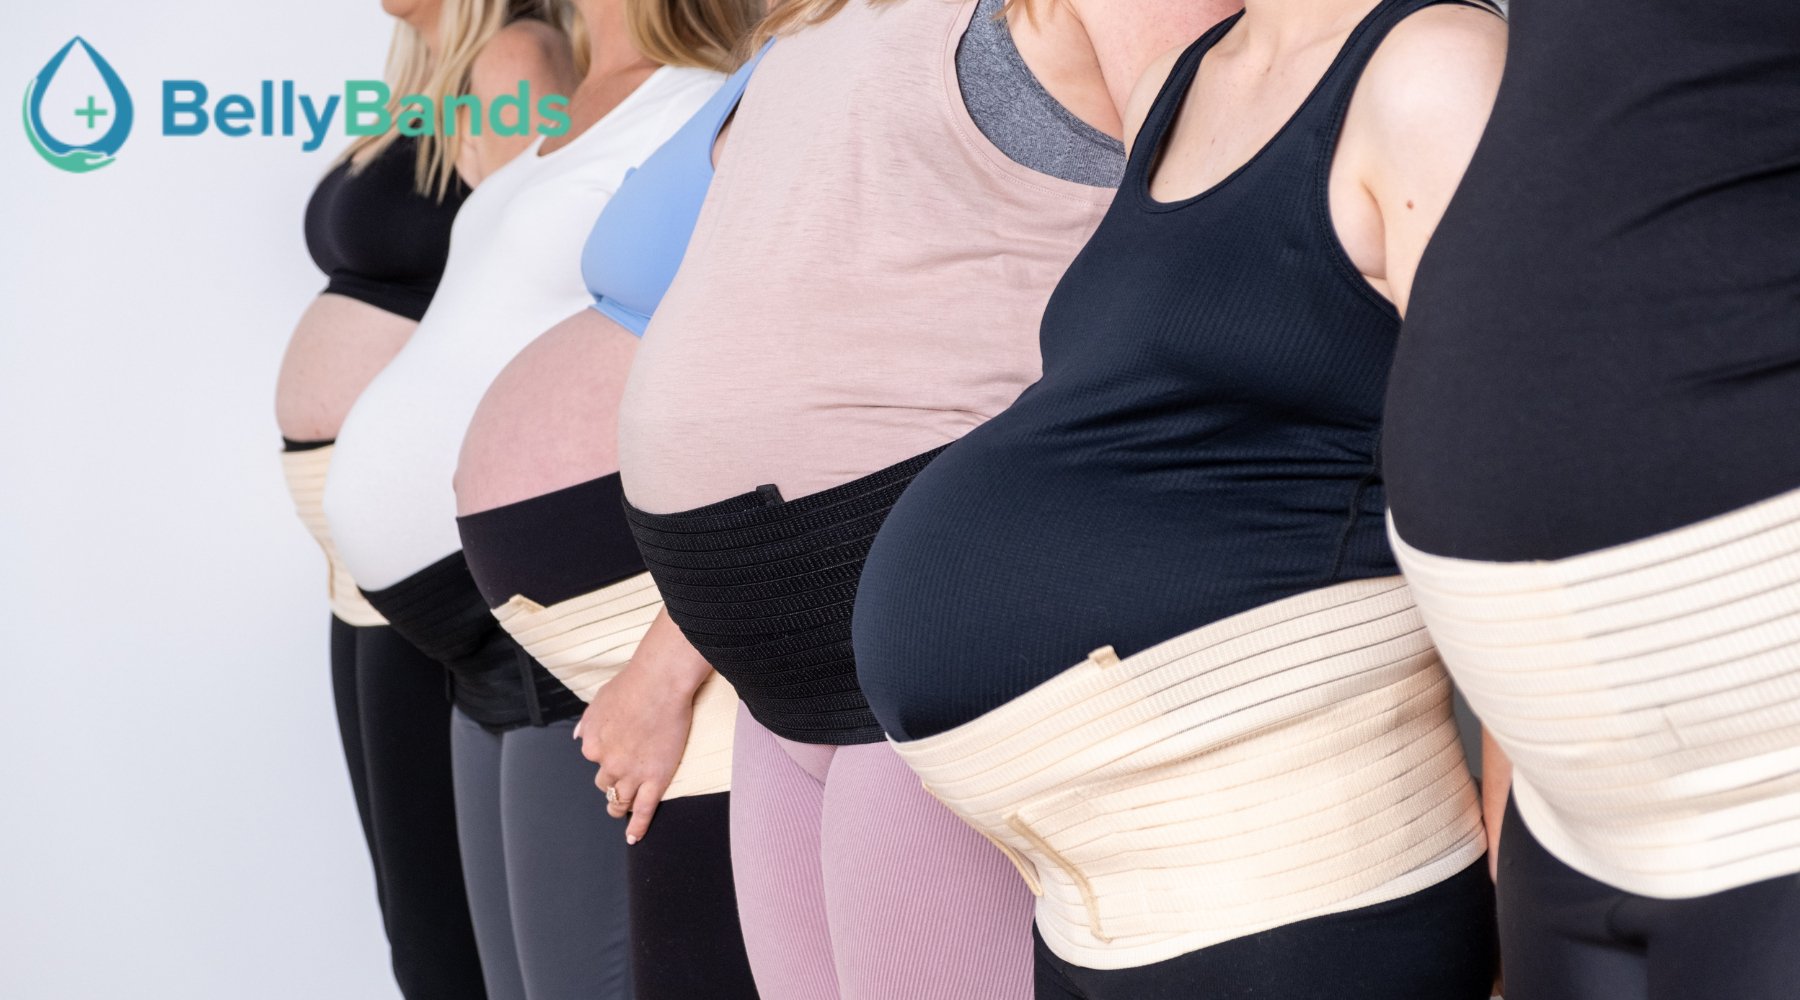 http://www.bellybands.com.au/cdn/shop/articles/are-belly-bands-safe-to-wear-during-pregnancy-834321.jpg?v=1699611156